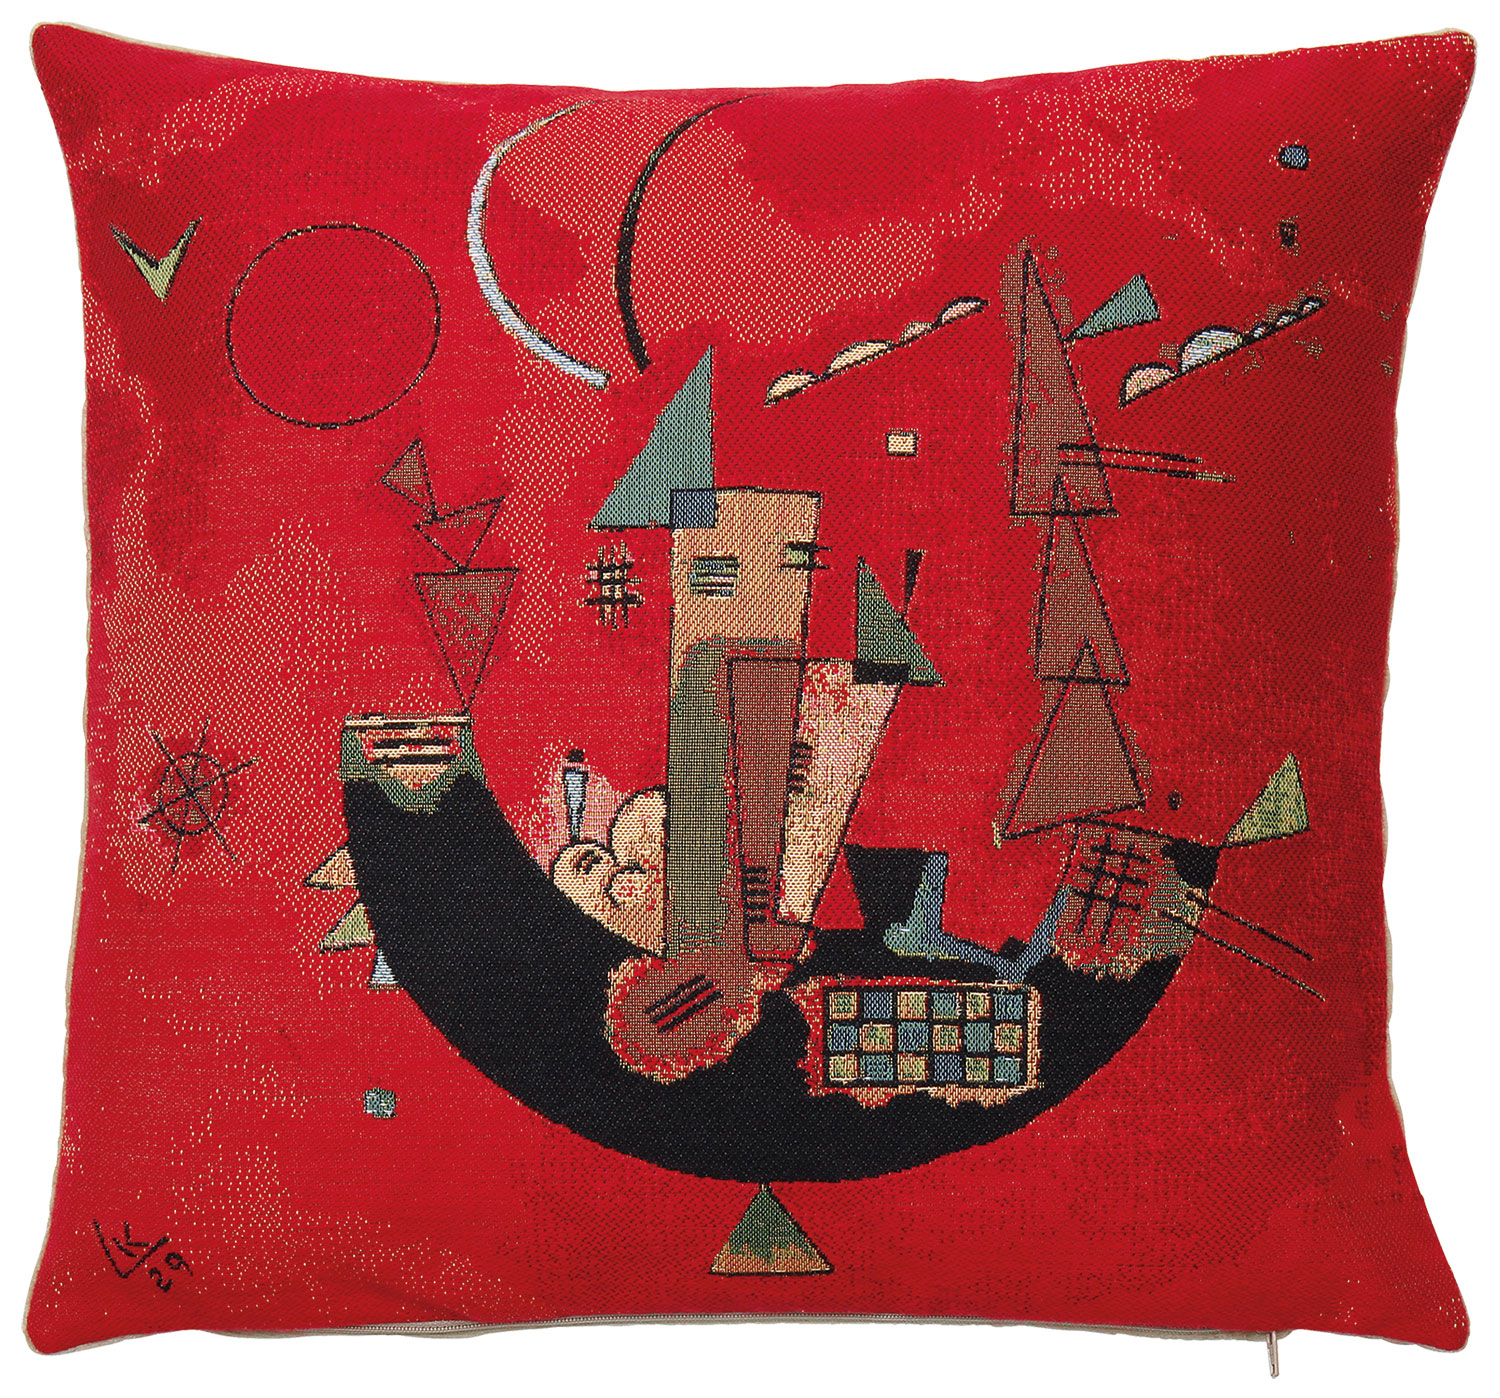 Cushion cover "For and Against" by Wassily Kandinsky